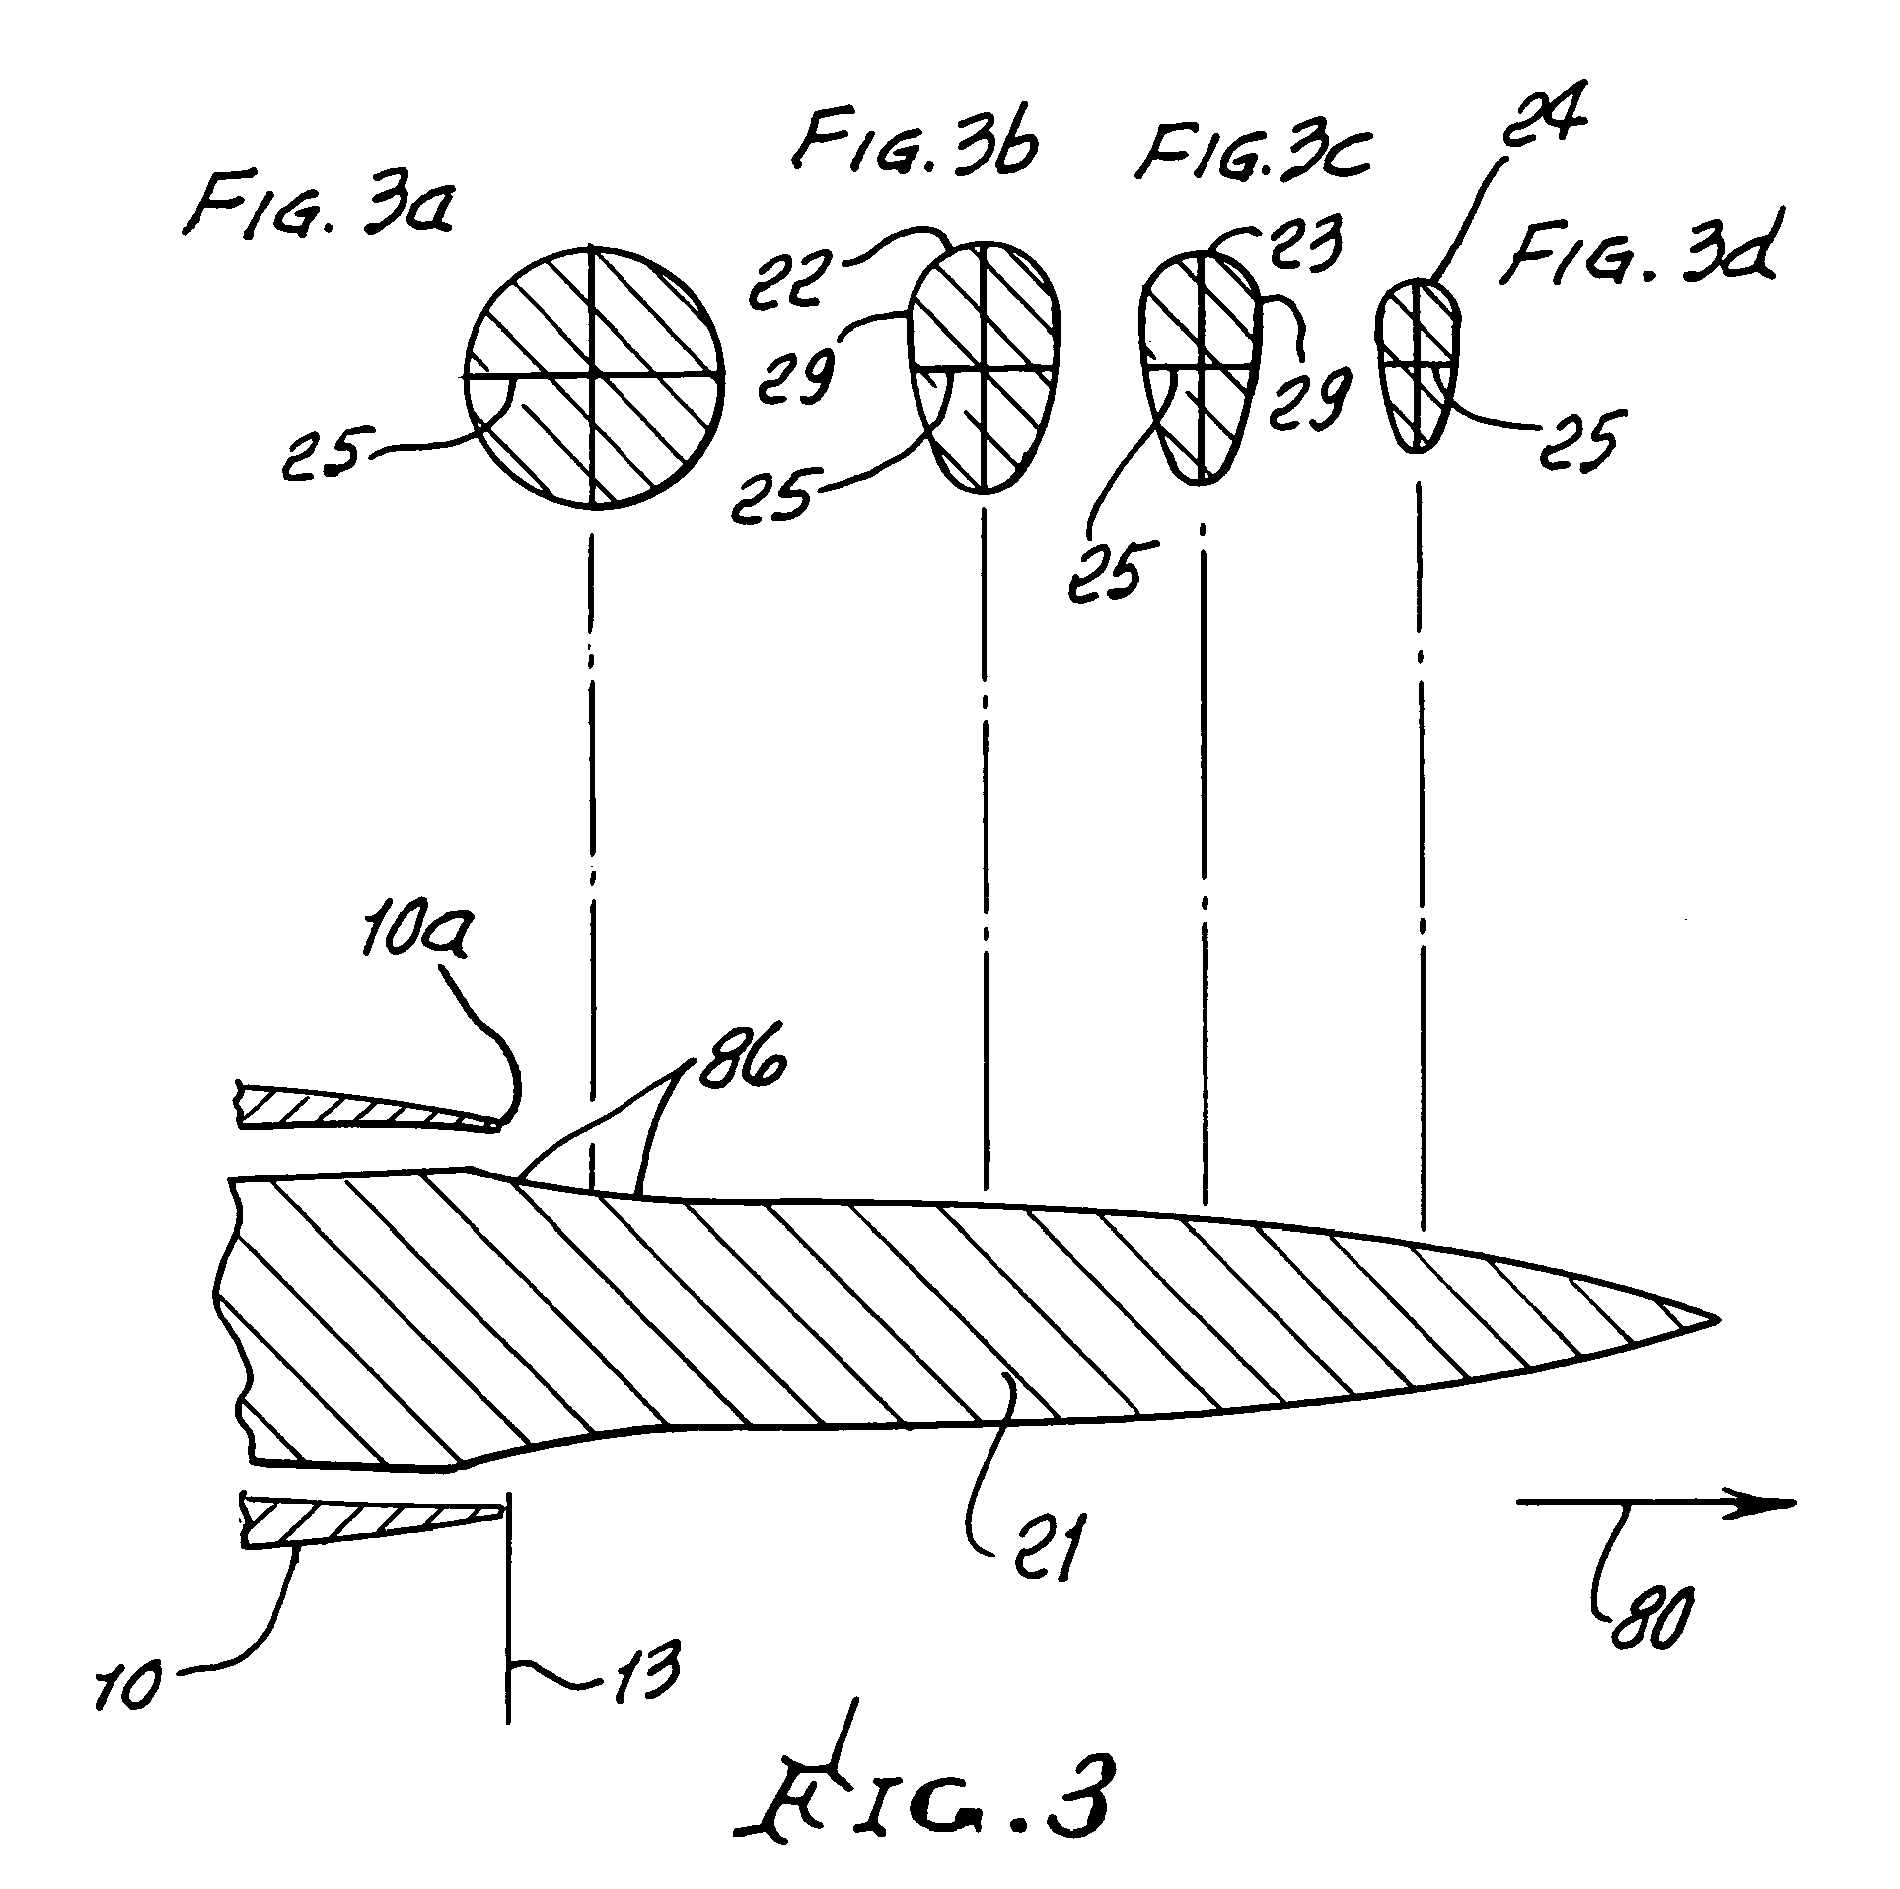 Jet nozzle plug with varying, non-circular cross sections